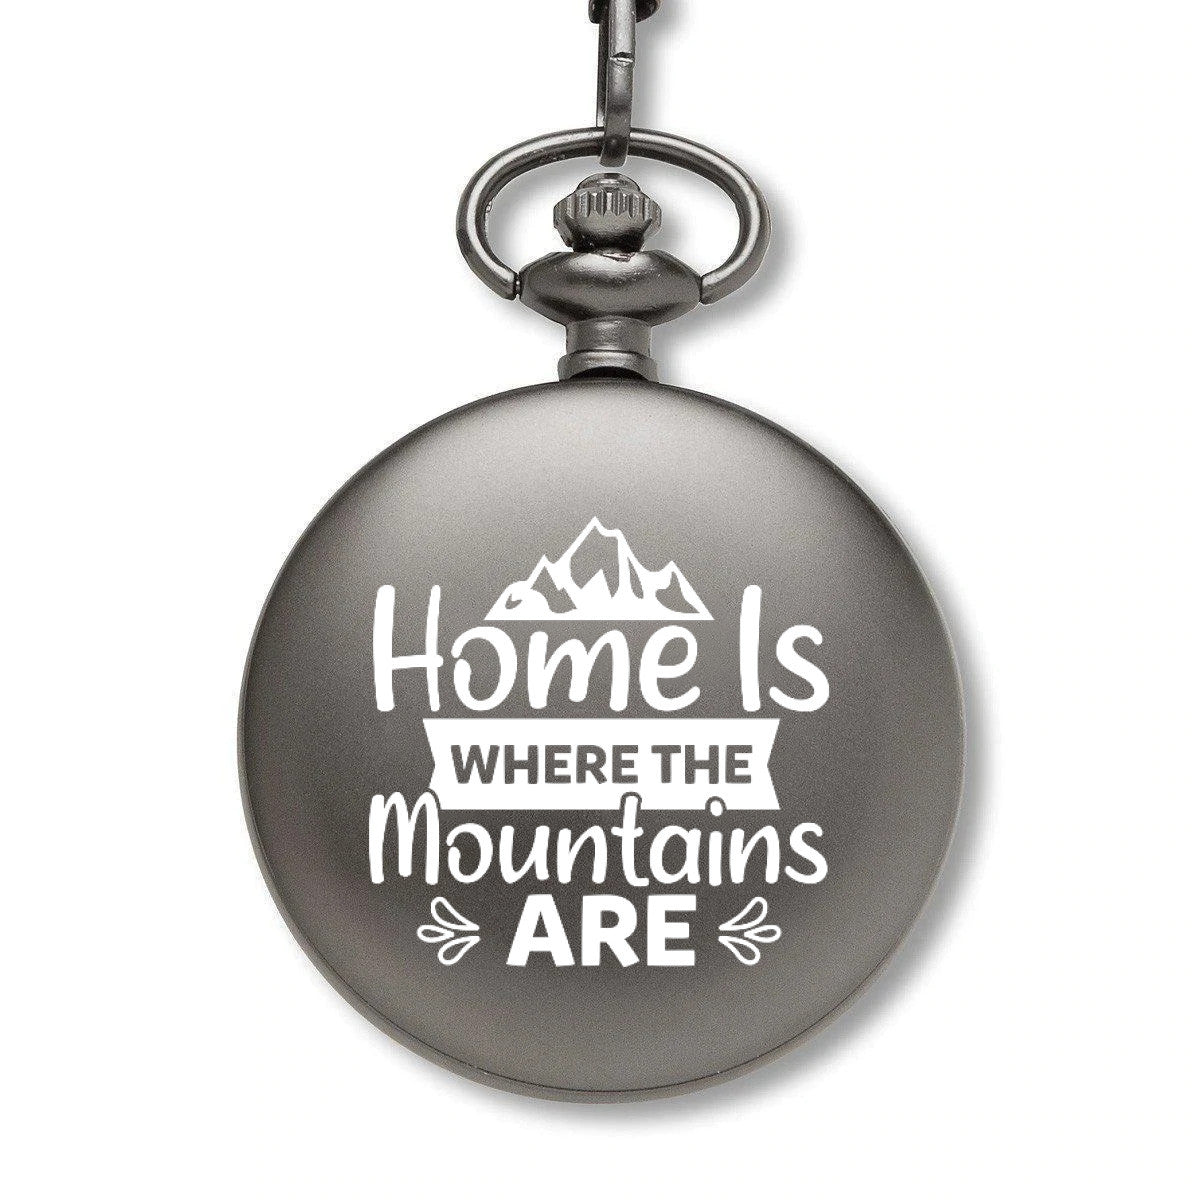 Home Is Where The Mountains Are Pocket Watch